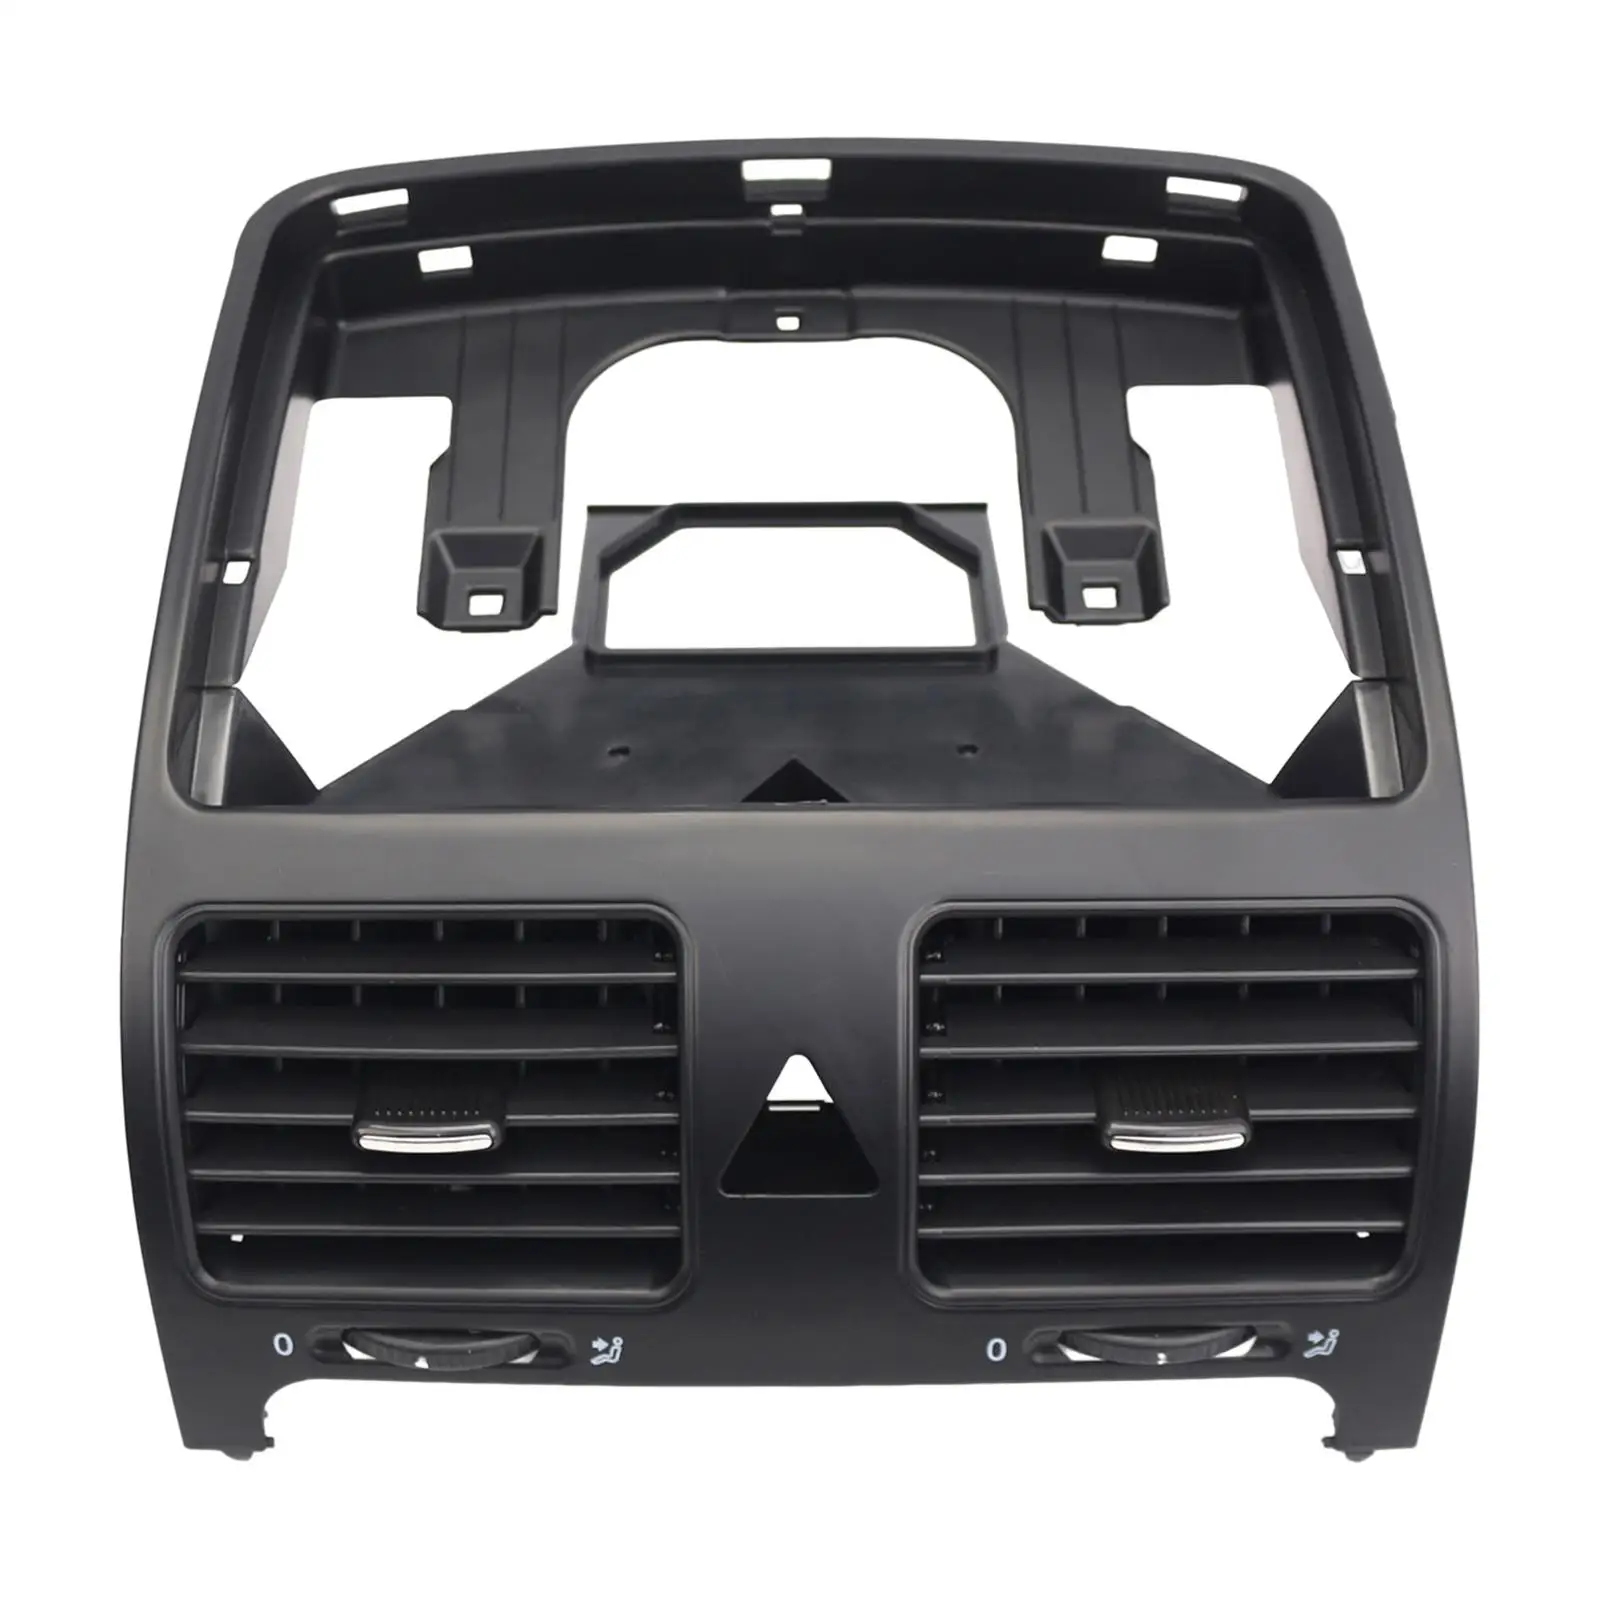 A/C Air Vent Outlet Grille Panel Premium Material Easily Install Center Dashboard for forVW Golf MK5 Assembly Accessory